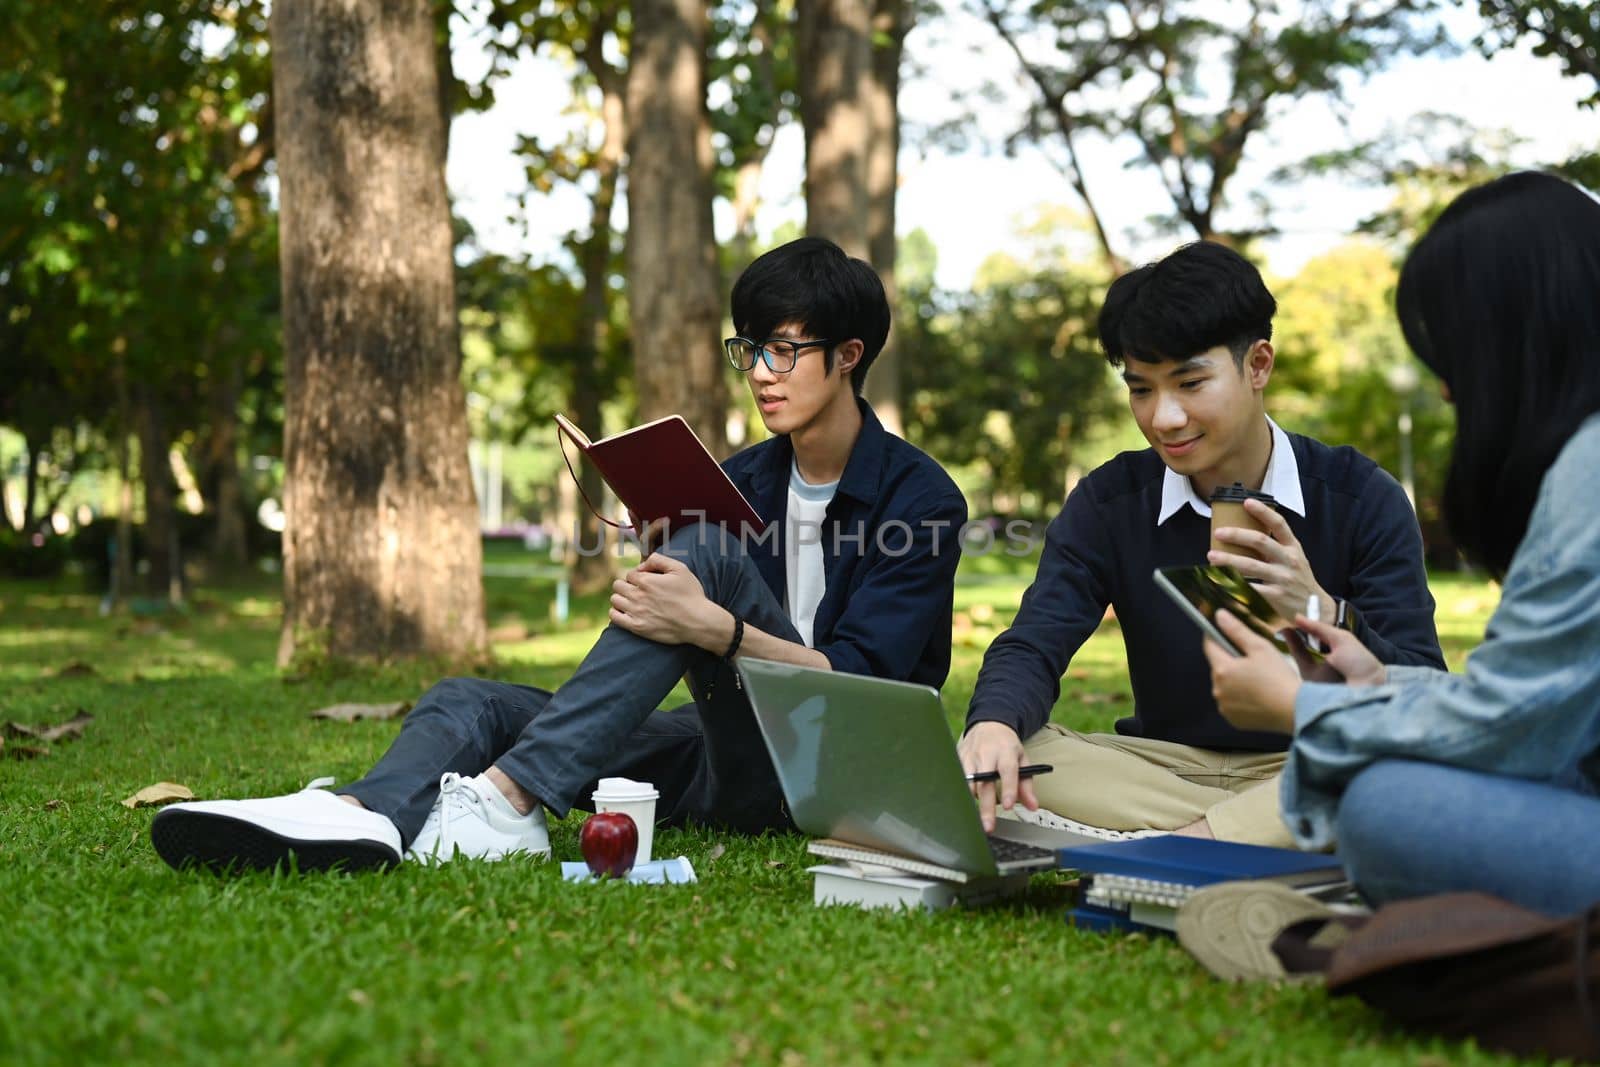 Group of university students talking, relaxing on campus lawn and working on laptop together. Education and lifestyle concept.